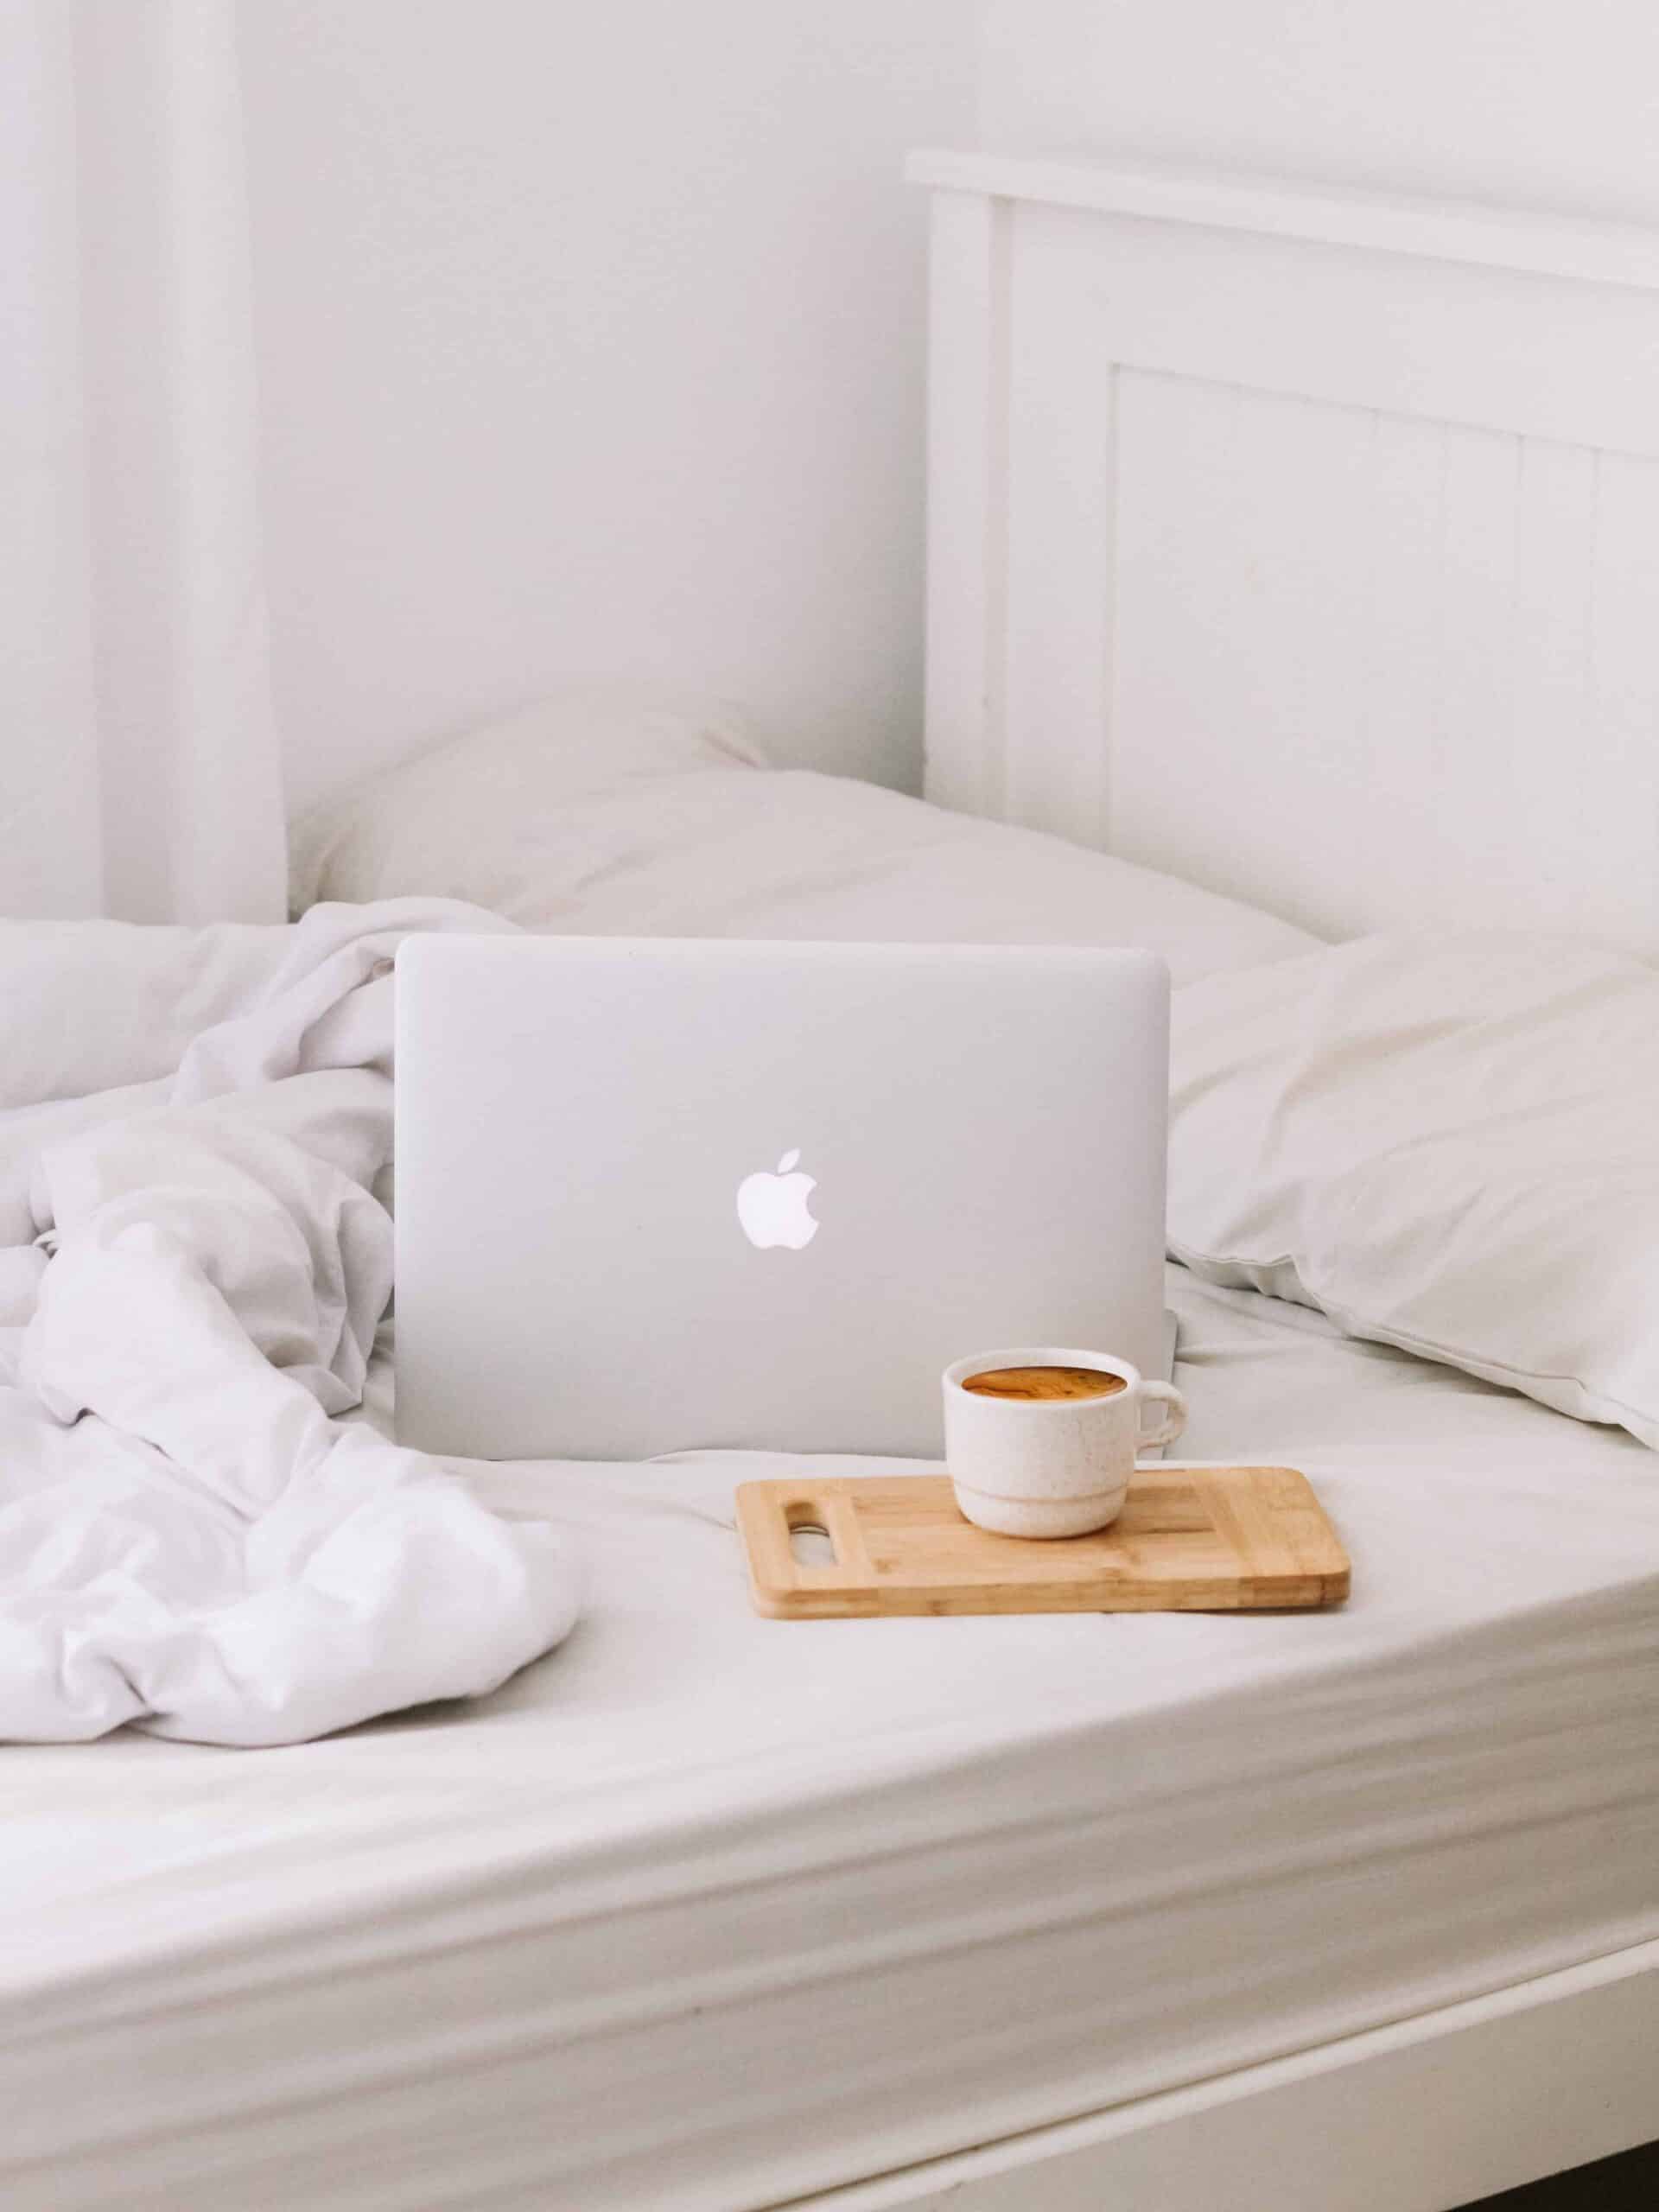 Having a morning routine is a great way to gain focus and clarity and make sure the work for the day is the right work. 